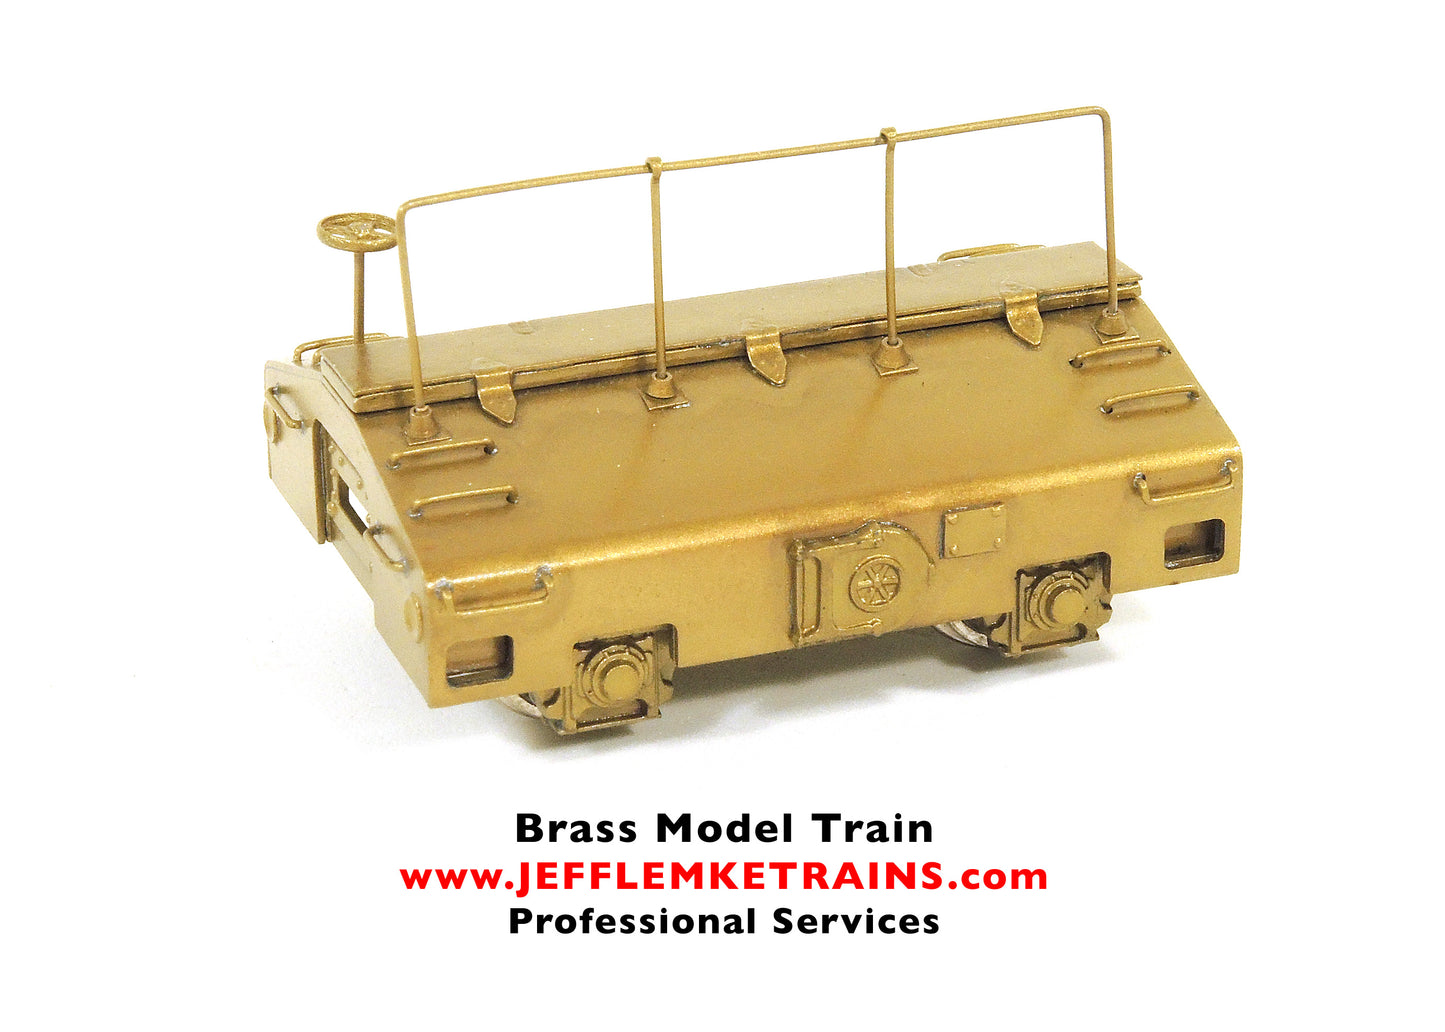 HO Scale Brass Hallmark Models Scale Test Weight Car made by Dong Jin of Korea